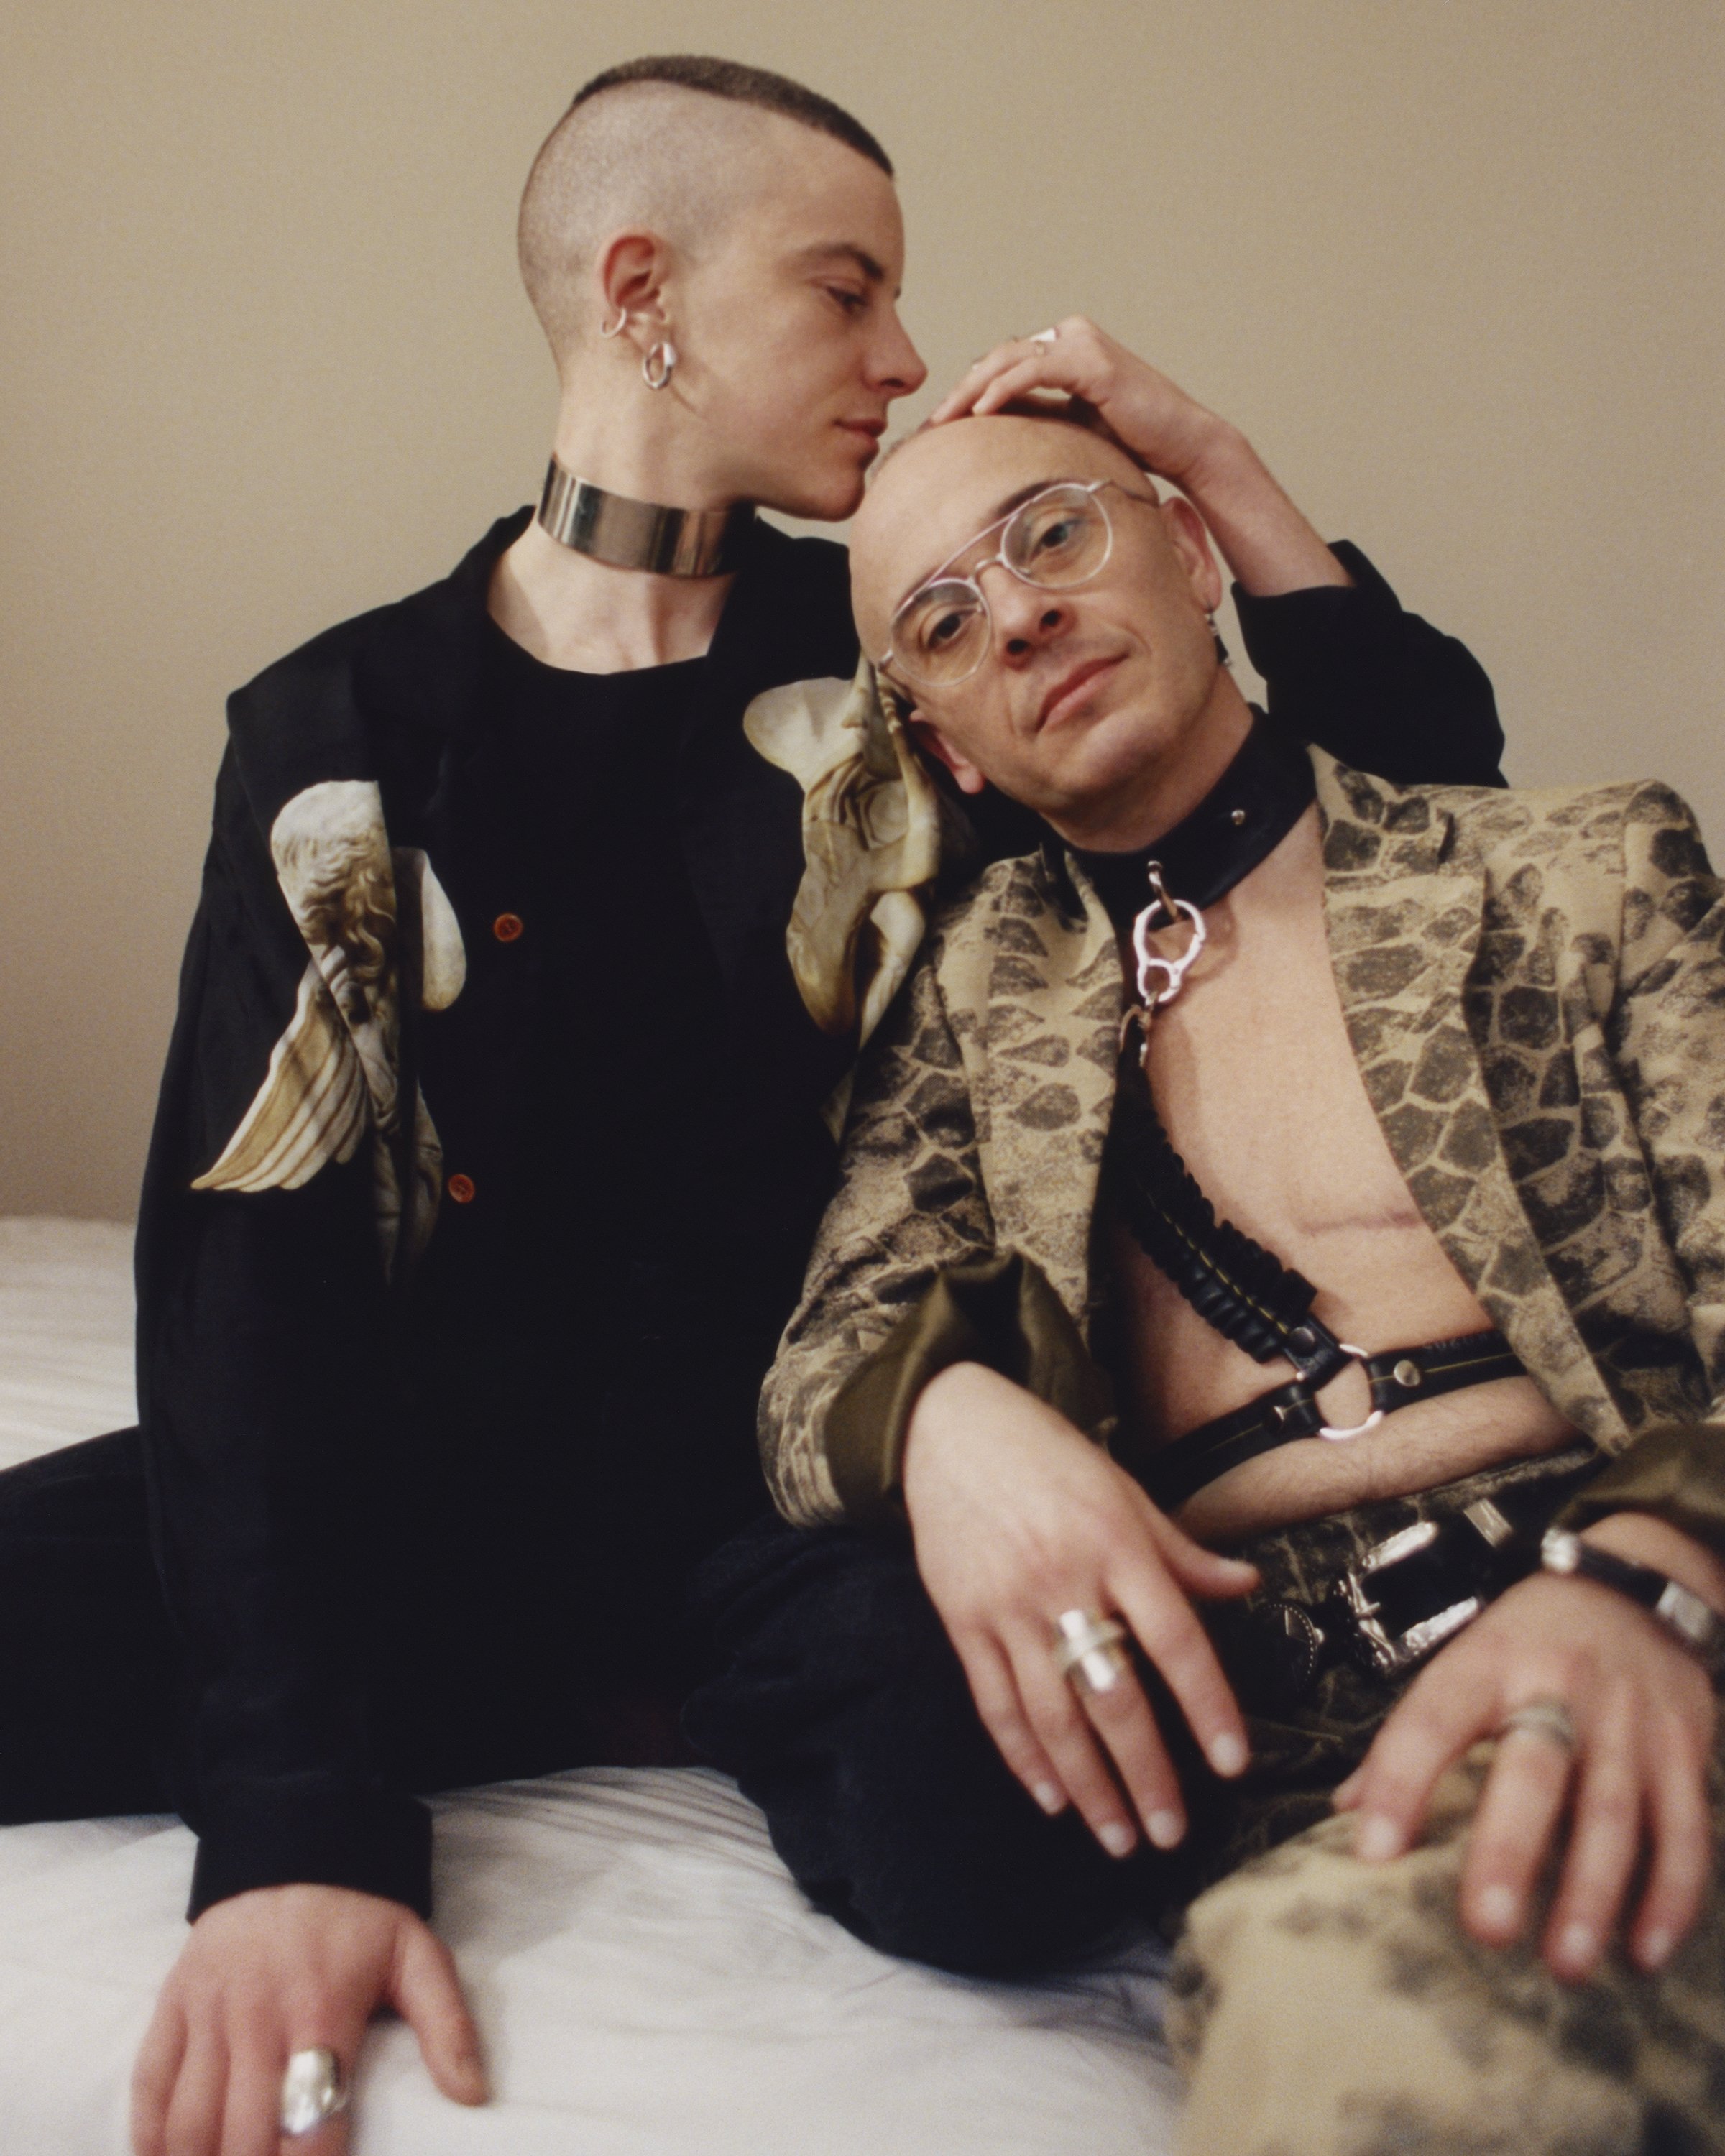  eli and orlando for candy transversal acne special 